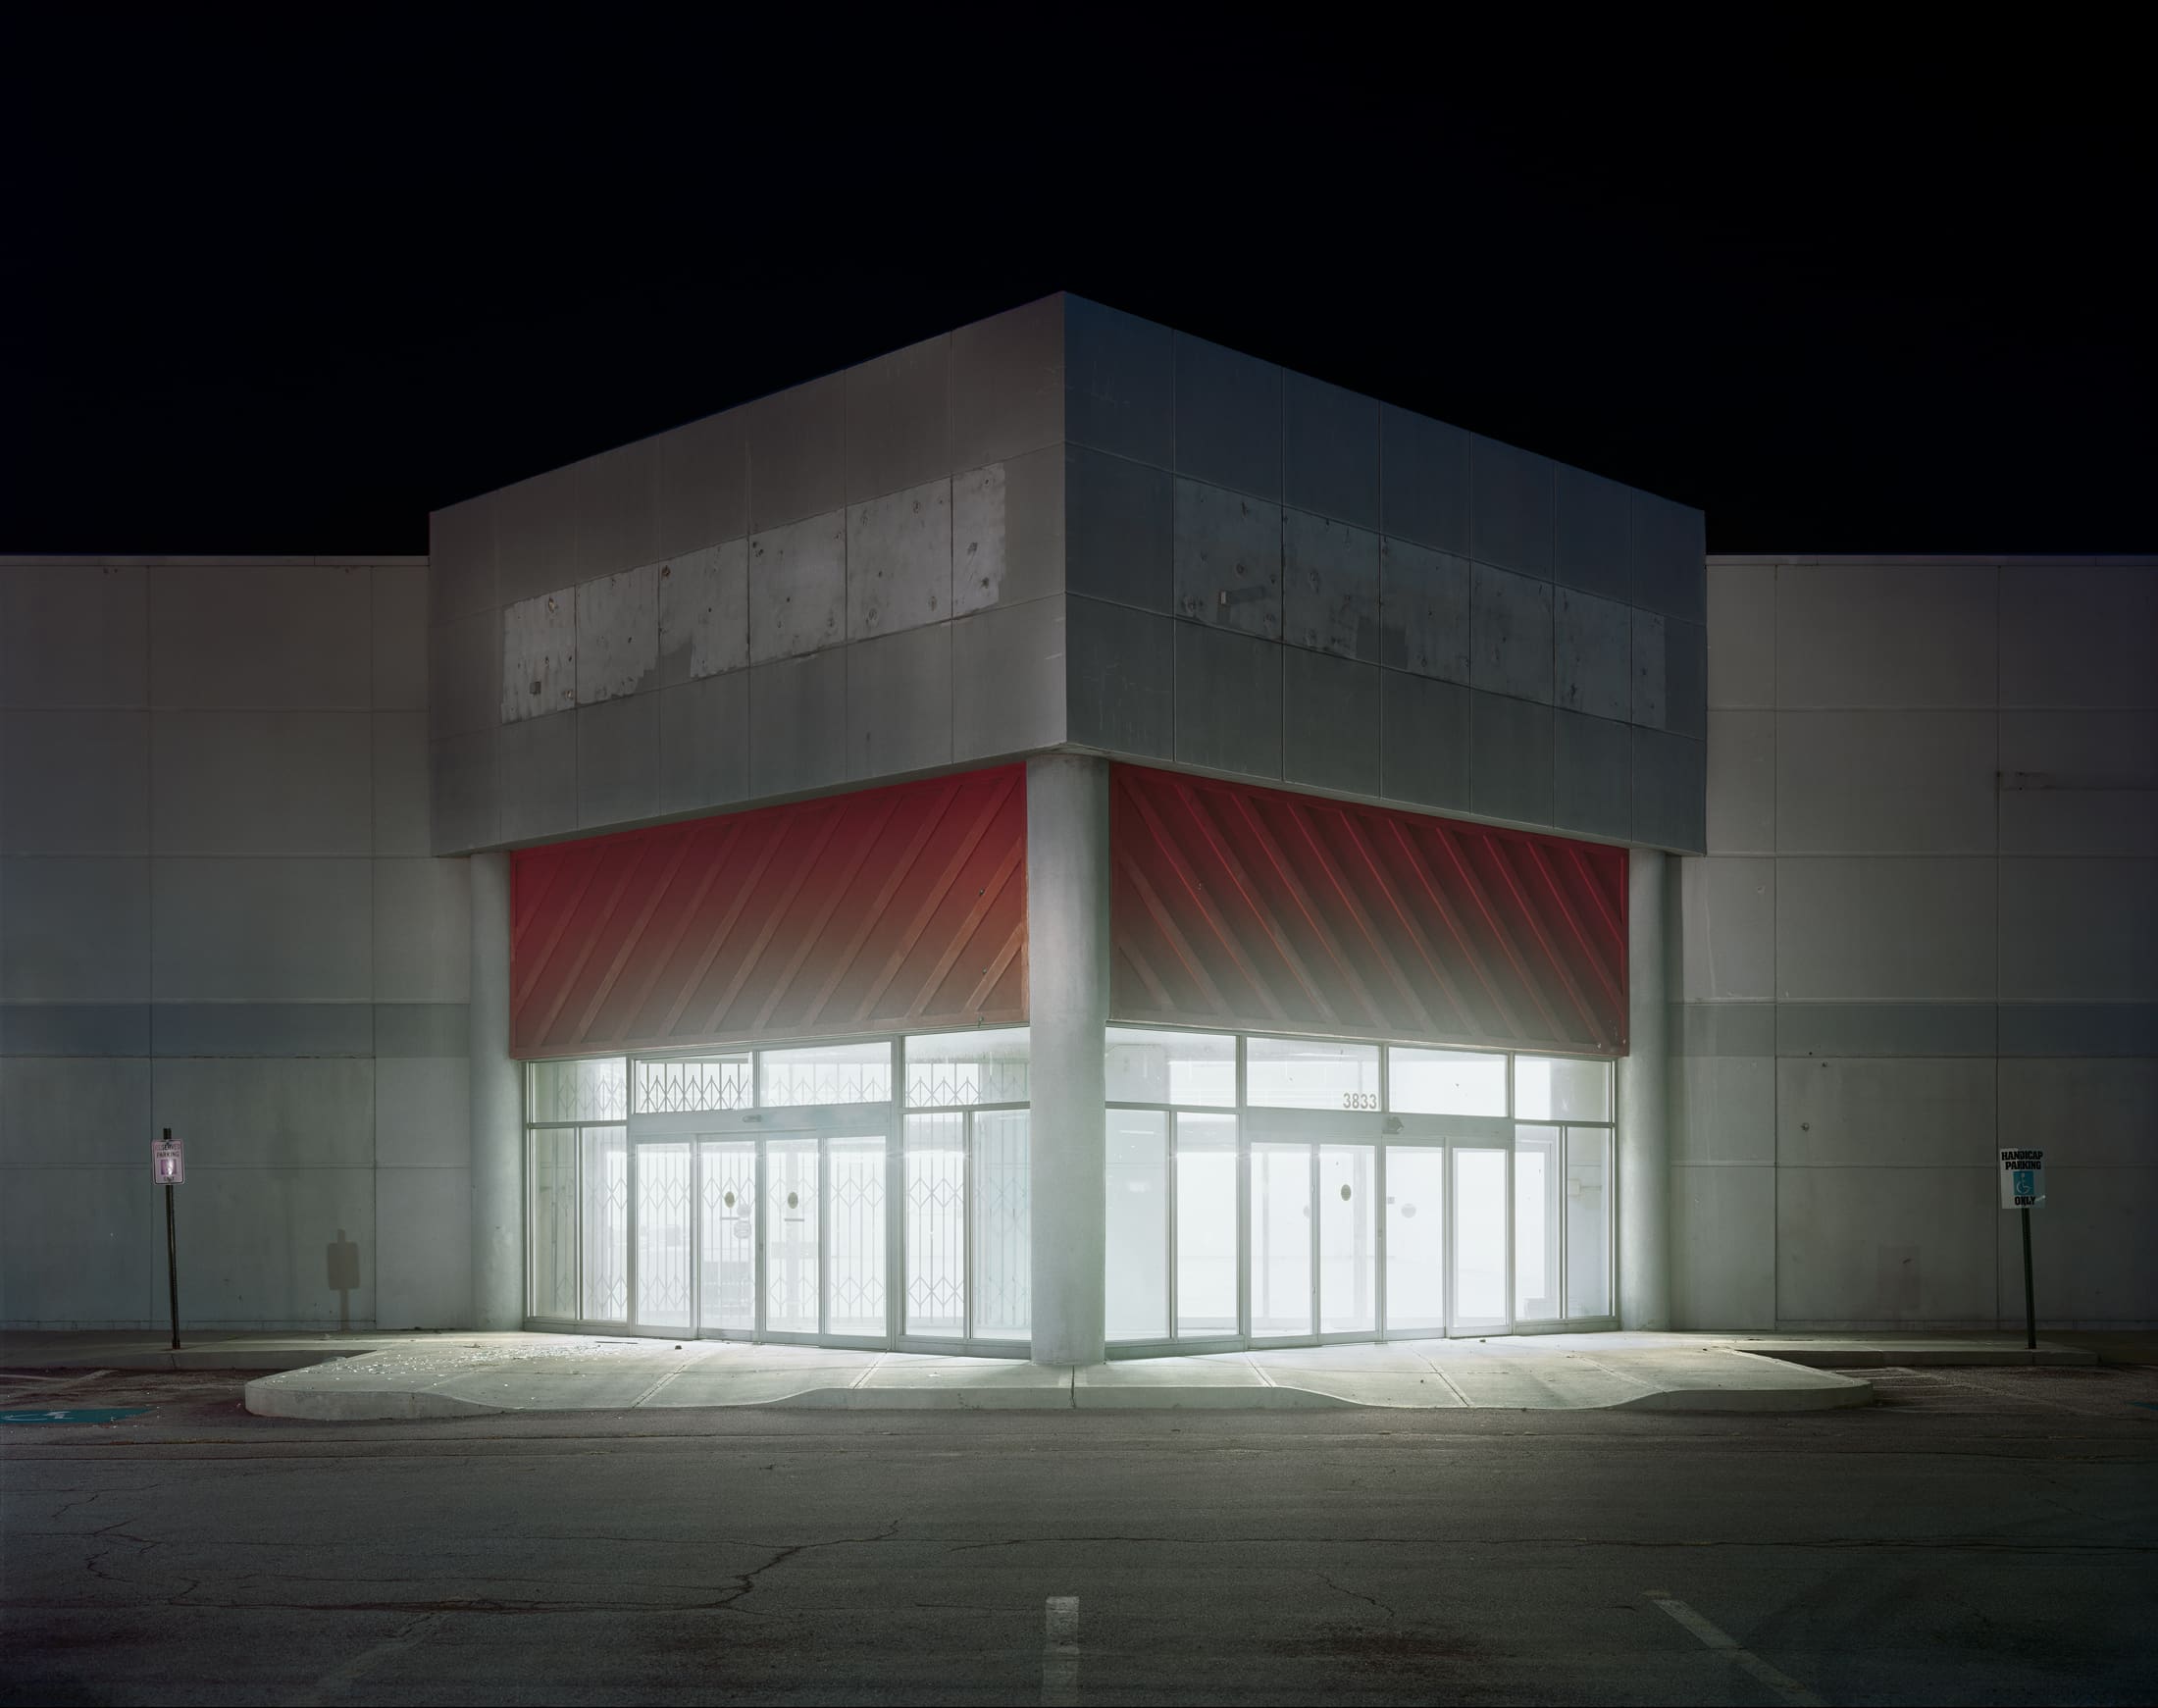 Brian Ulrich. Pep Boys 3, 2009. Ultrachrome inkjet print. Courtesy of Fred and Laura Ruth Bidwell